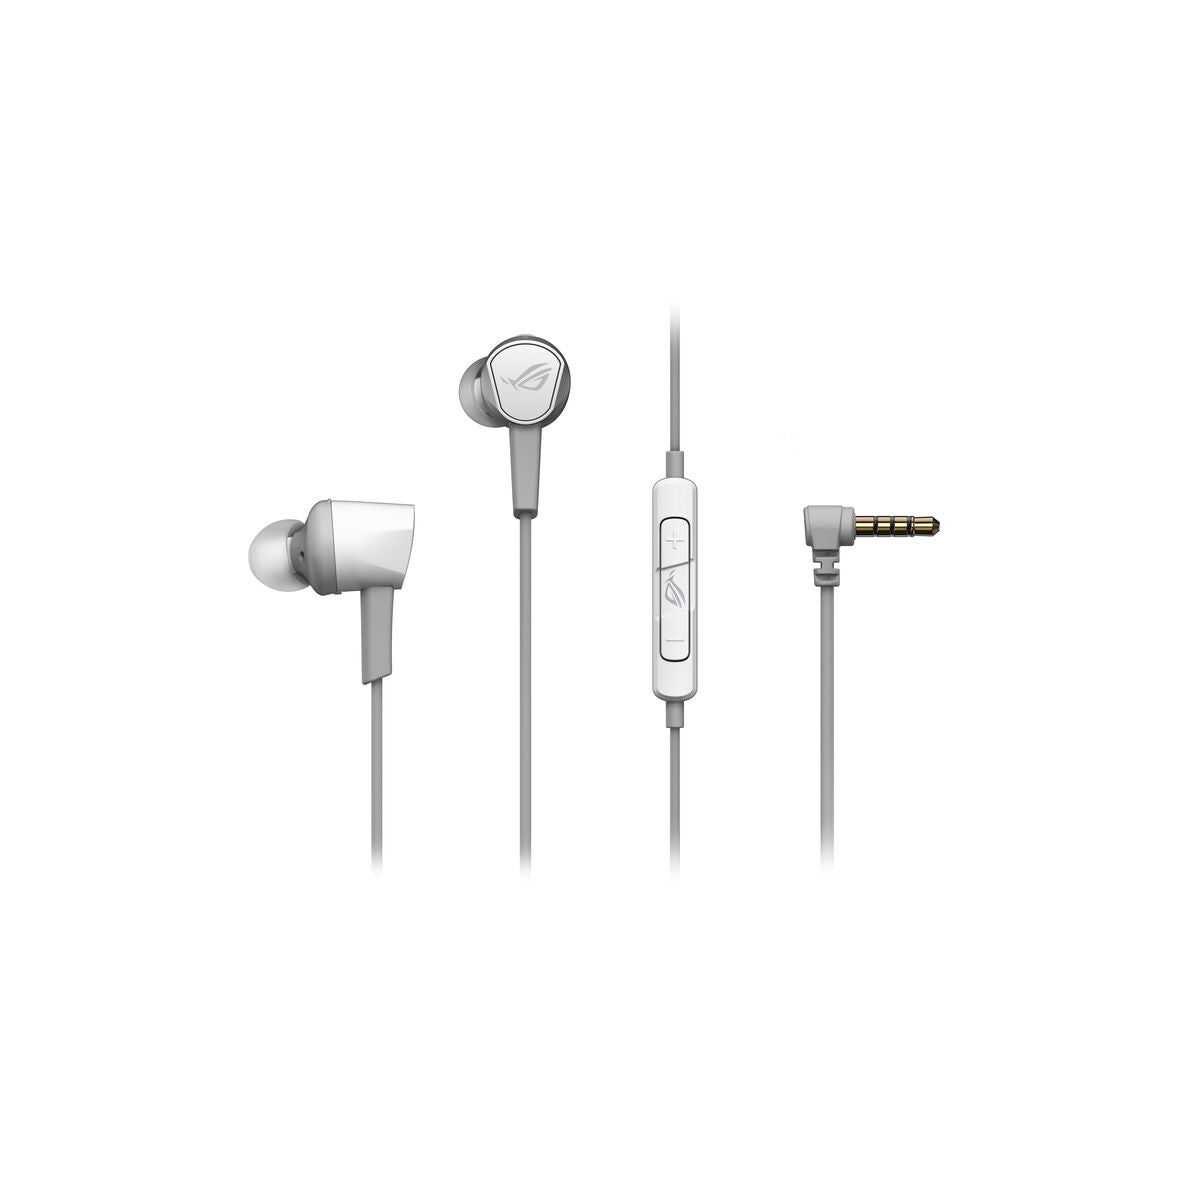 Headphones Asus Cetra II Core White, Asus, Electronics, Mobile communication and accessories, headphones-asus-cetra-ii-core-white, Brand_Asus, category-reference-2609, category-reference-2642, category-reference-2847, category-reference-t-19653, category-reference-t-21312, category-reference-t-4036, category-reference-t-4037, computers / peripherals, Condition_NEW, entertainment, gadget, music, office, Price_50 - 100, telephones & tablets, Teleworking, RiotNook